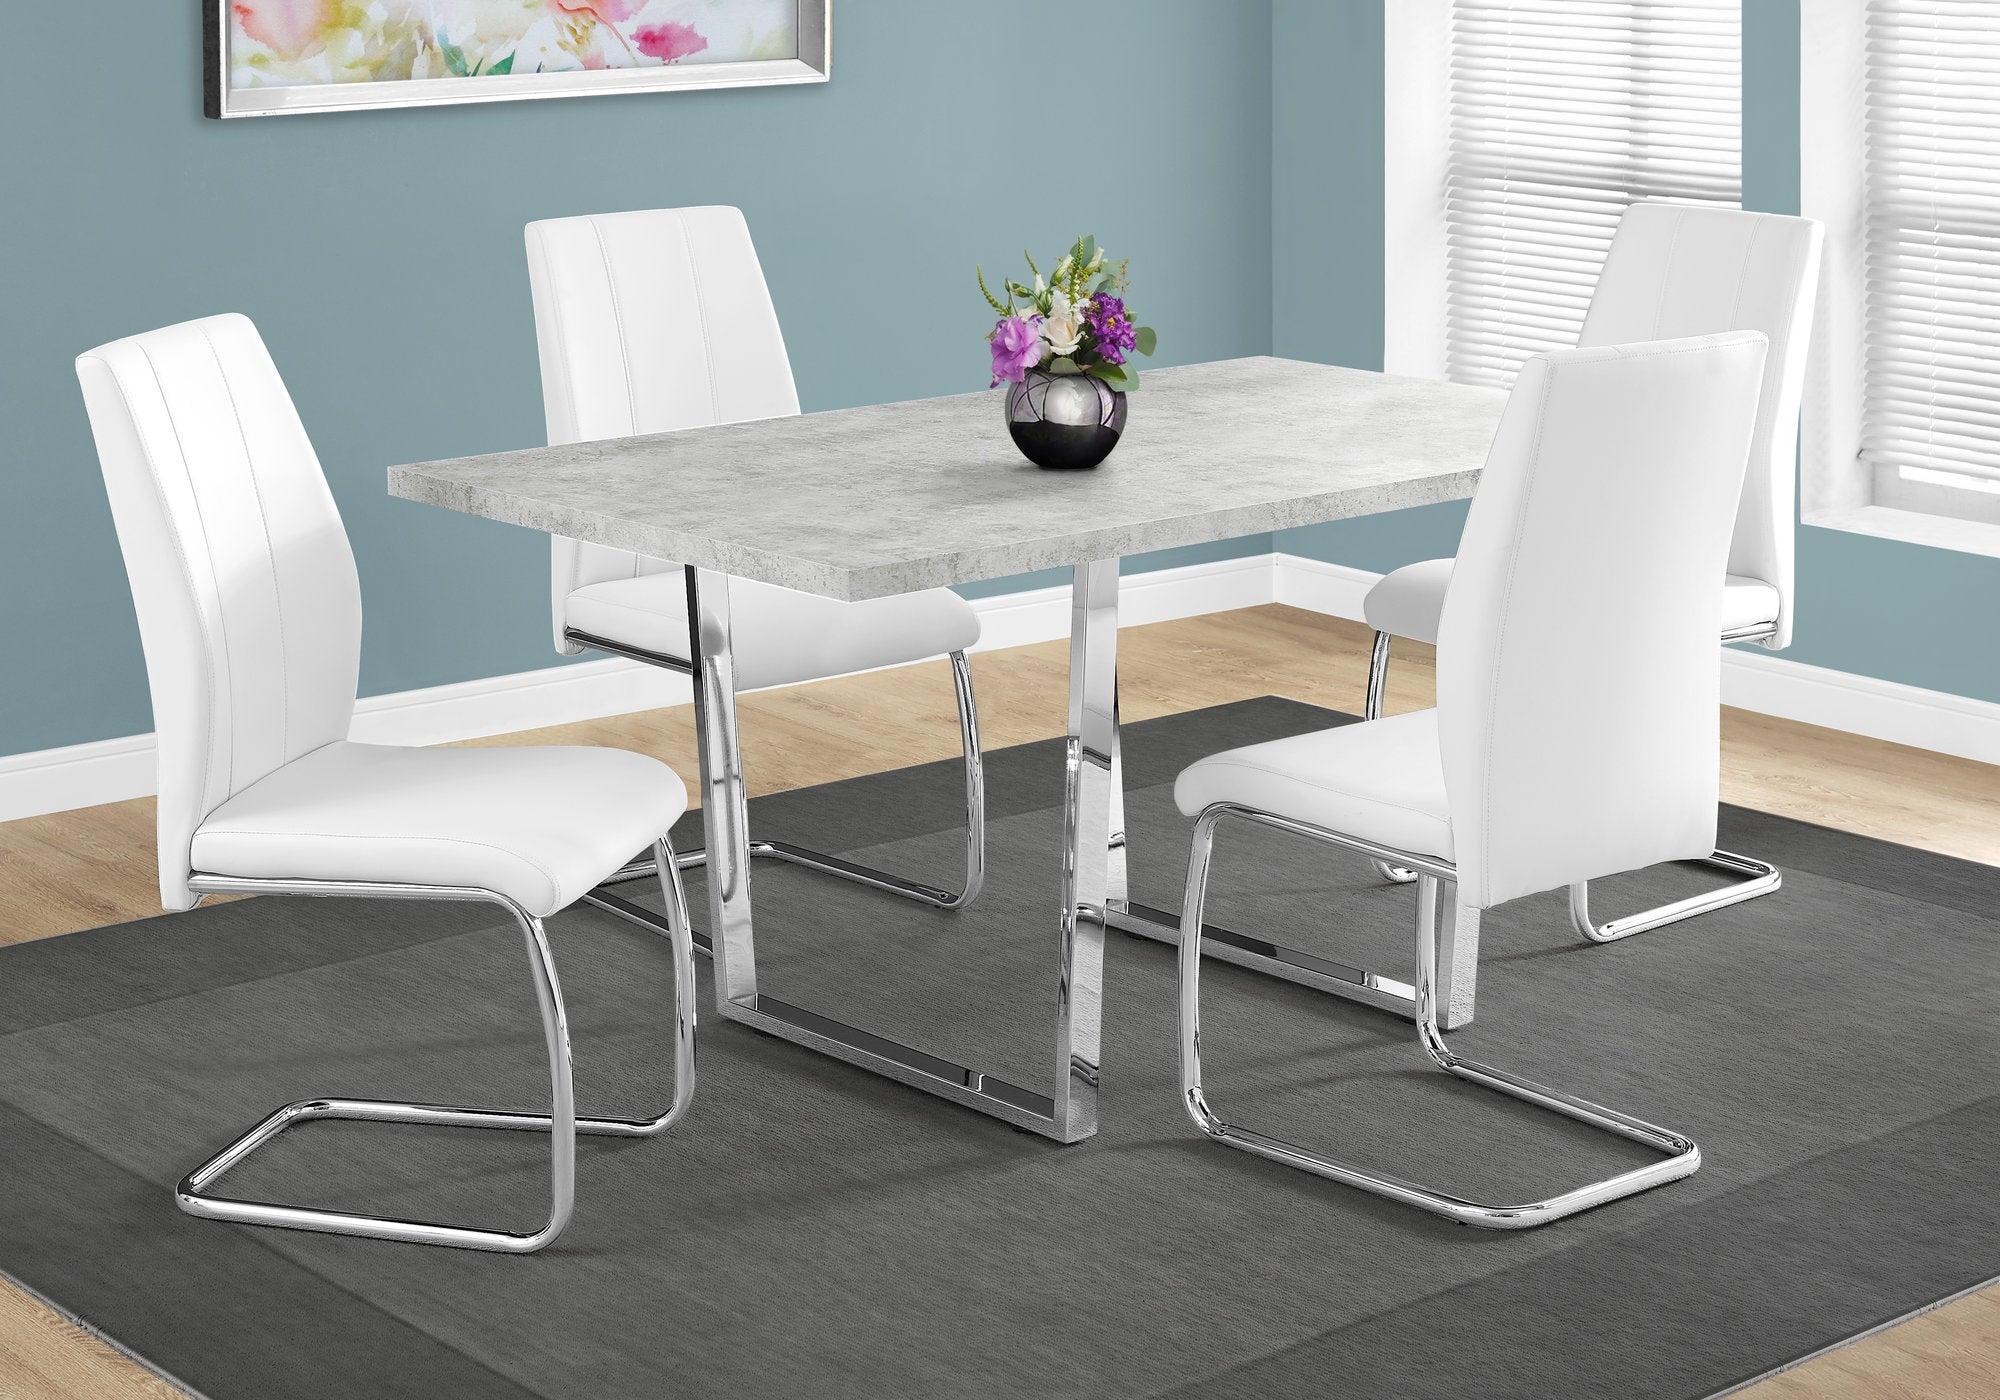 MN-591119    Dining Table, 60" Rectangular, Metal, Kitchen, Dining Room, Metal Legs, Laminate, Grey Cement Look, Chrome, Contemporary, Modern